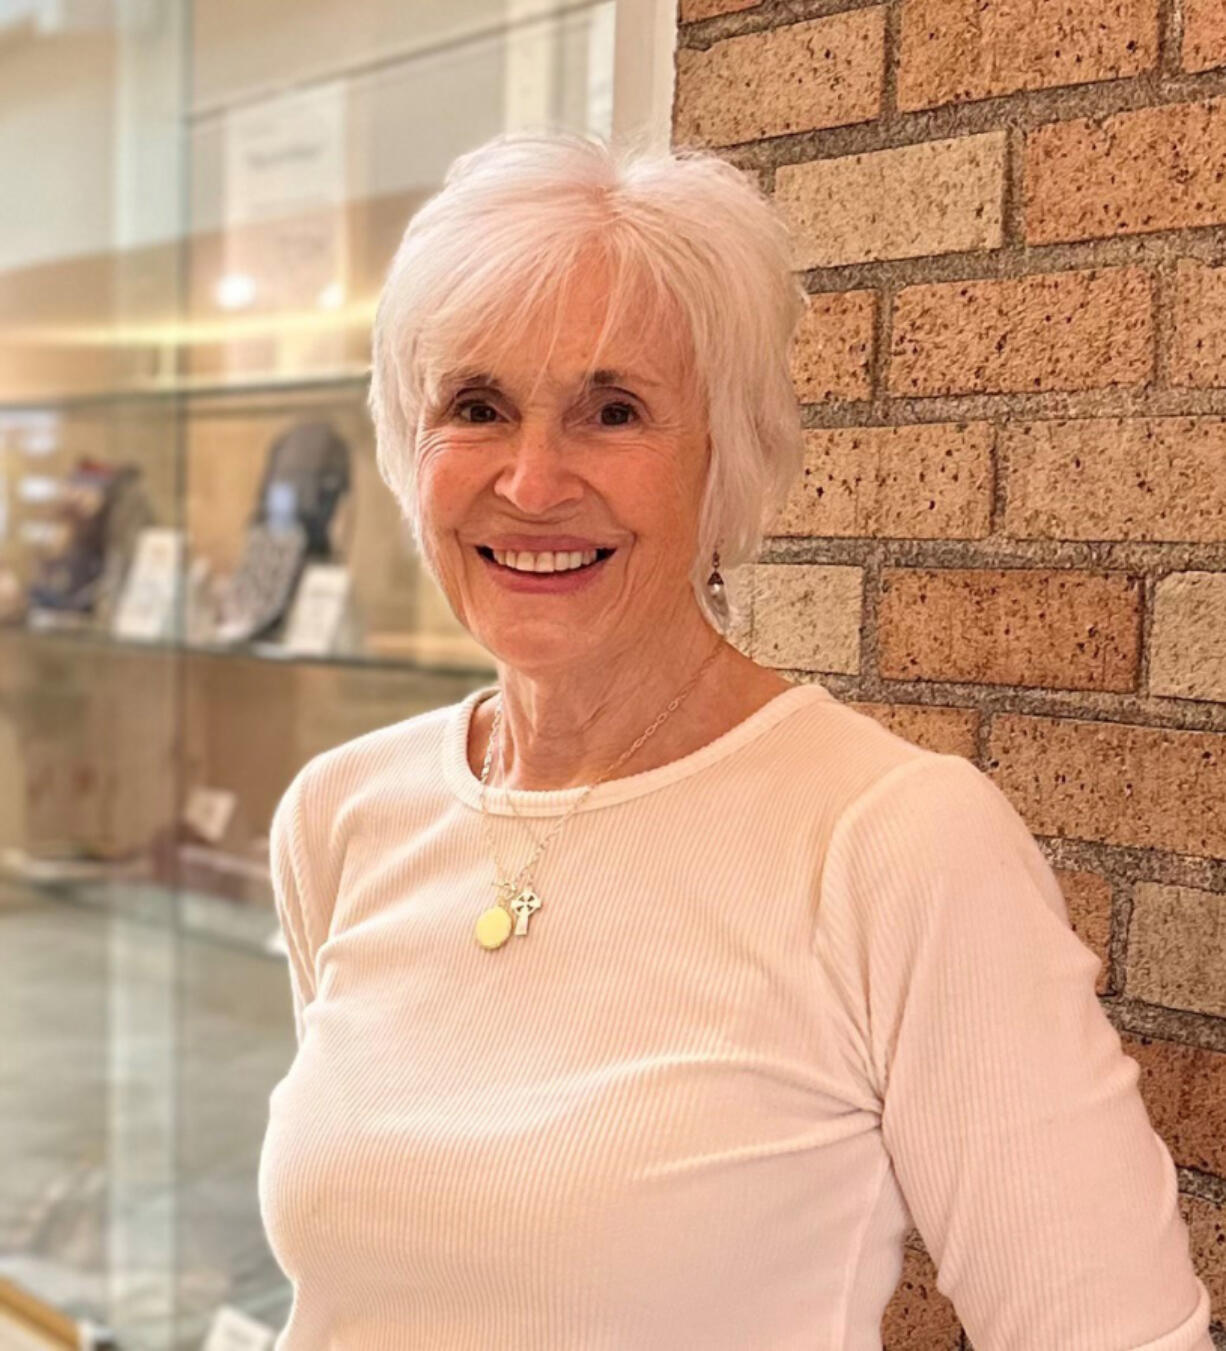 The Clark County Arts announced recently that it has selected Washougal resident Susan Dingle as Clark County poet laureate.